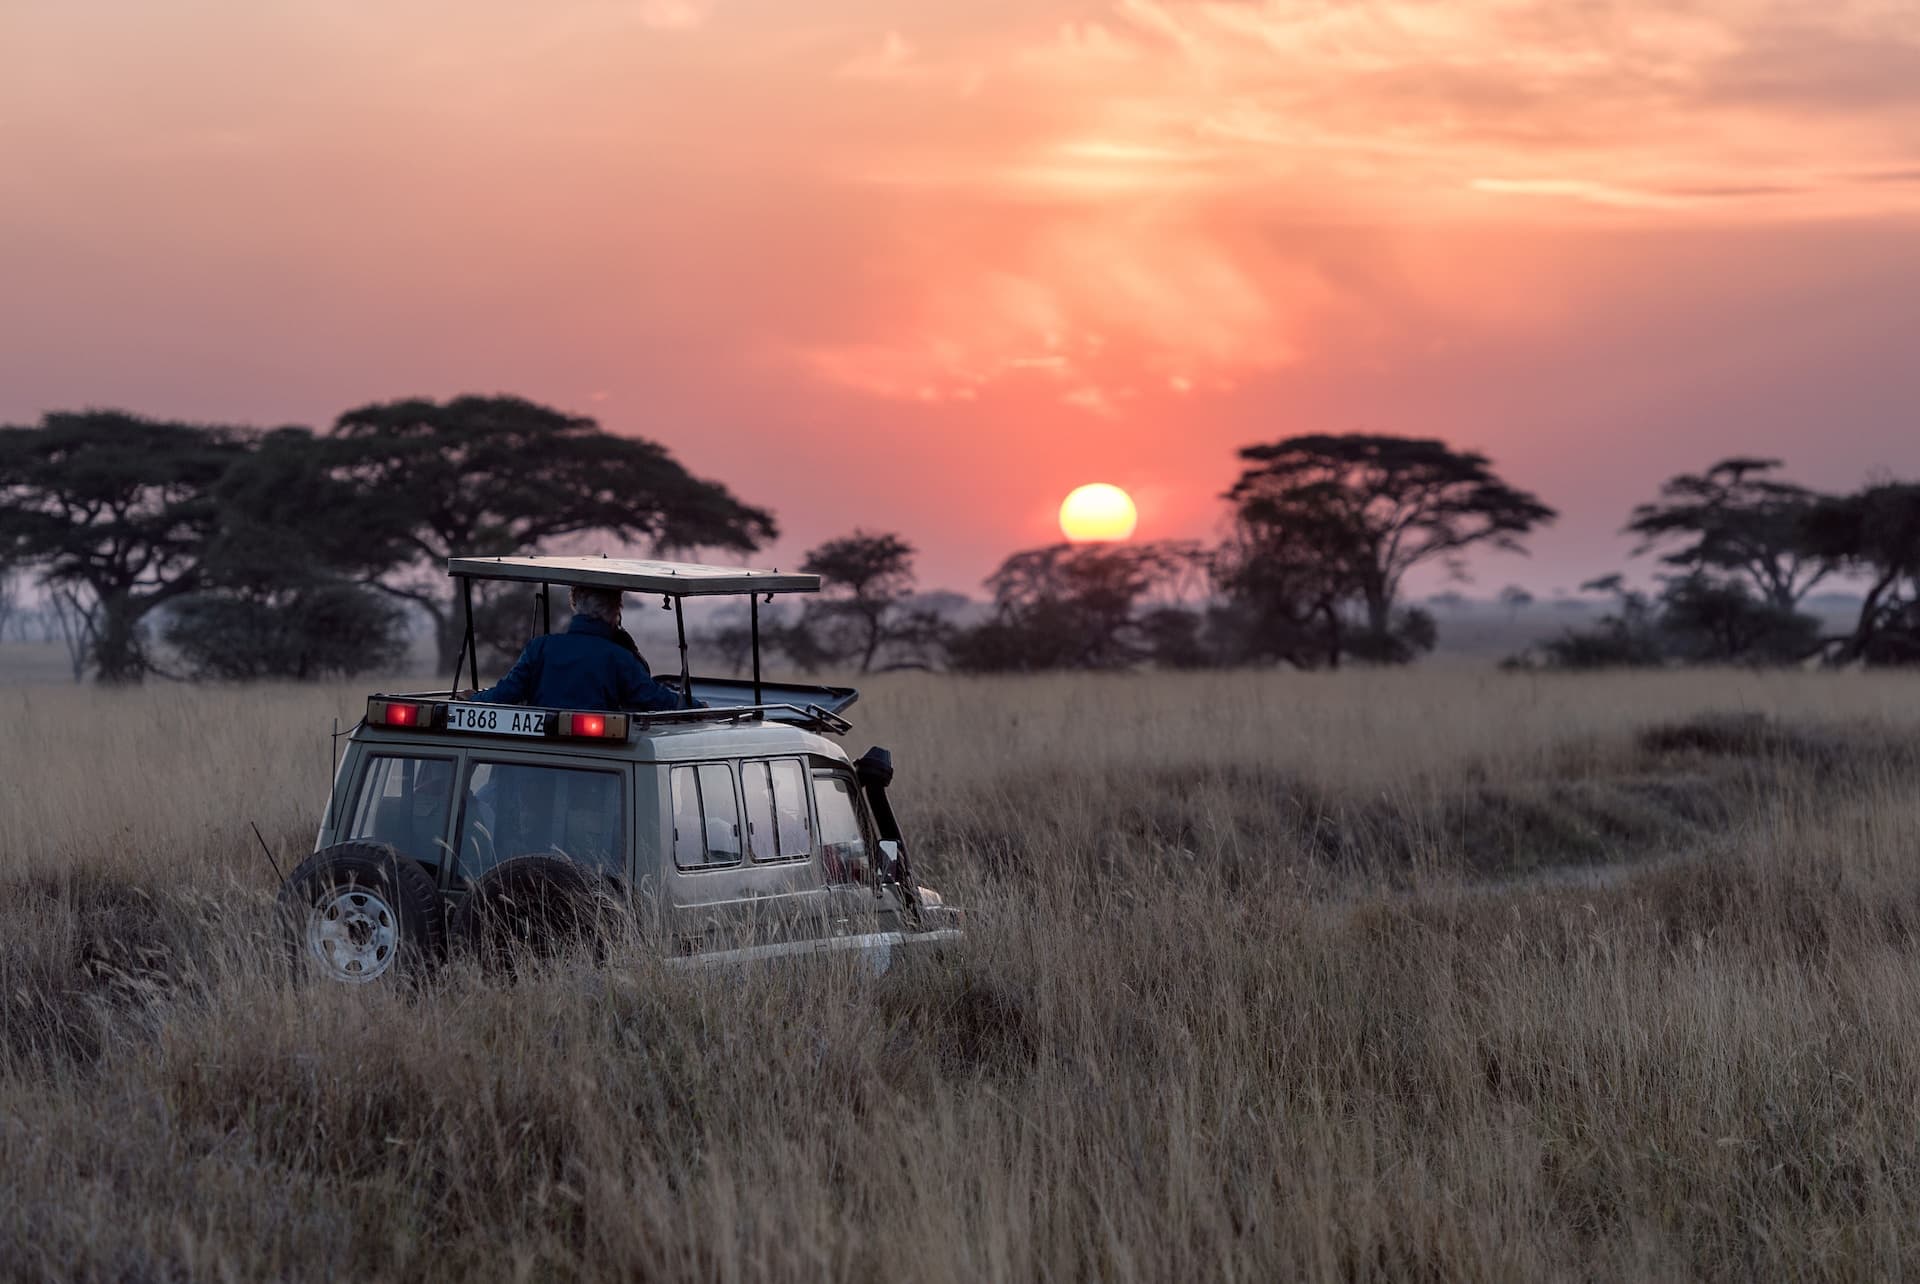 How to Pack for a Safari: Essential Packing Tips for a Long Safari in Tanzania